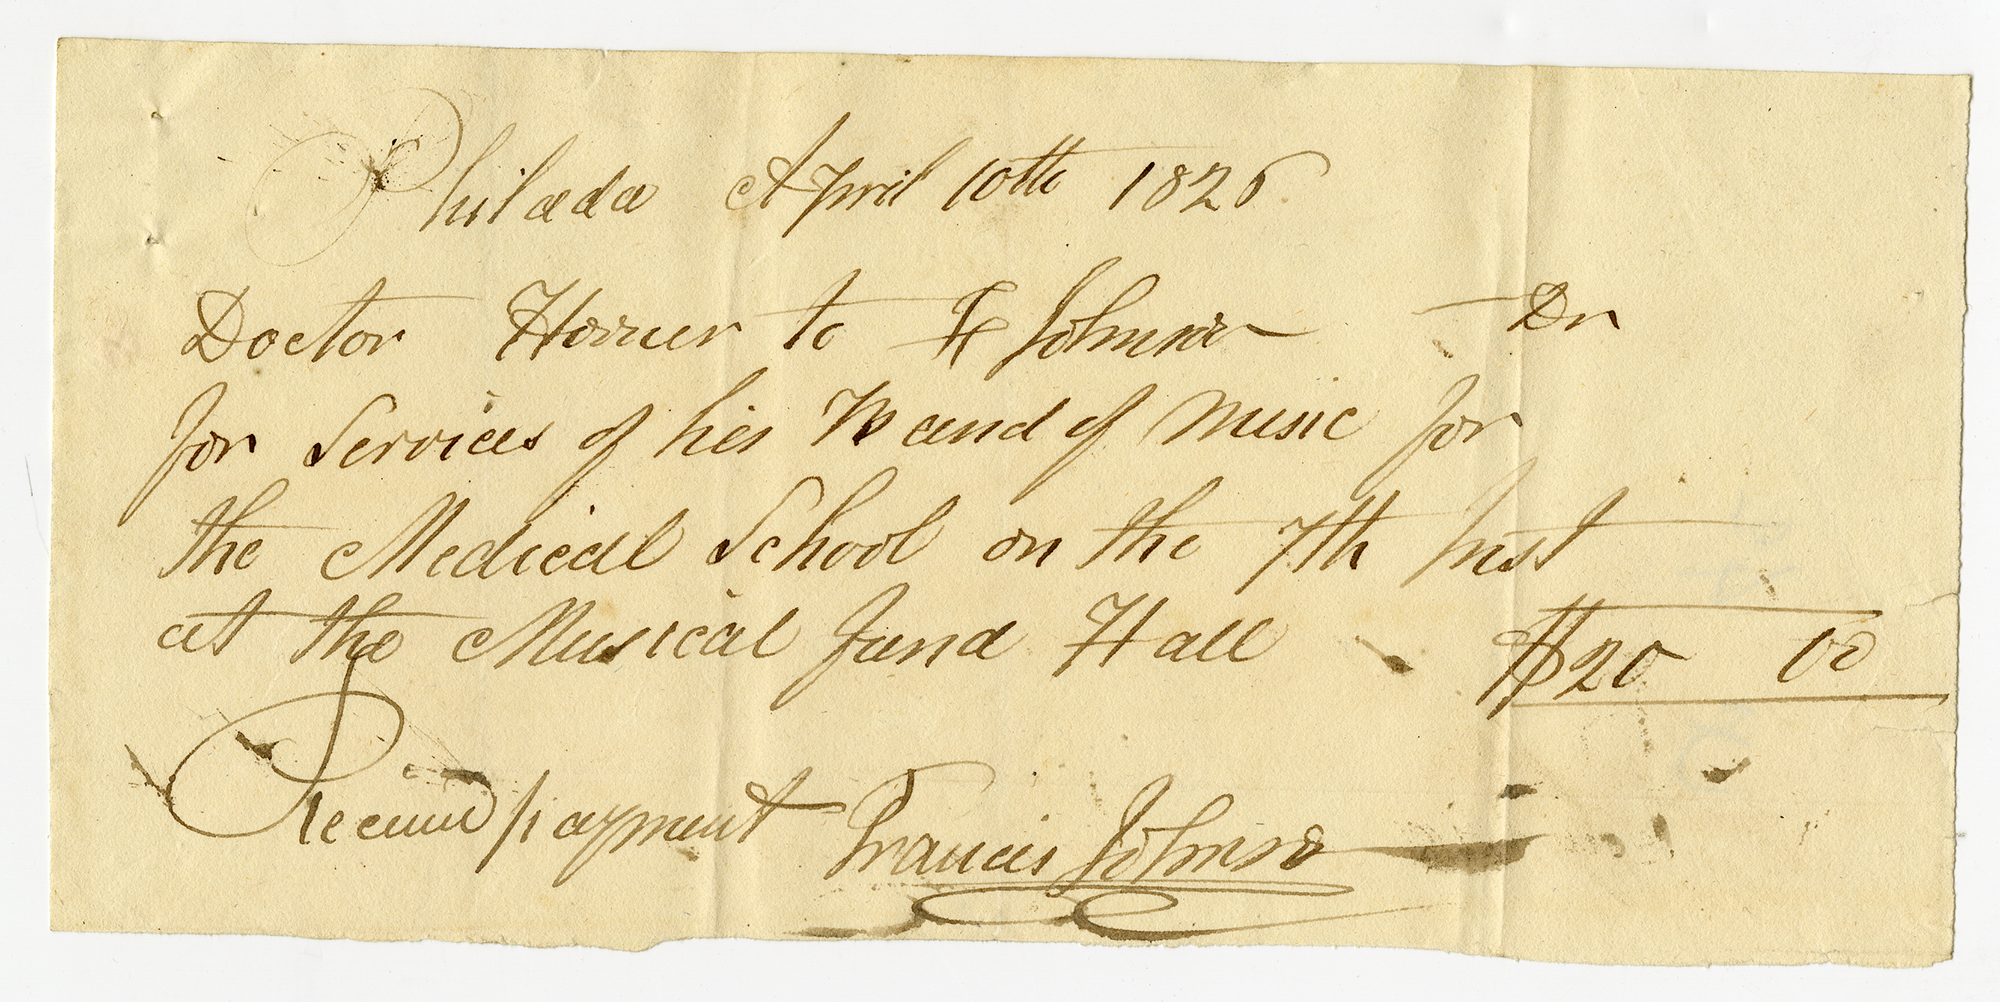 A receipt from 1826.